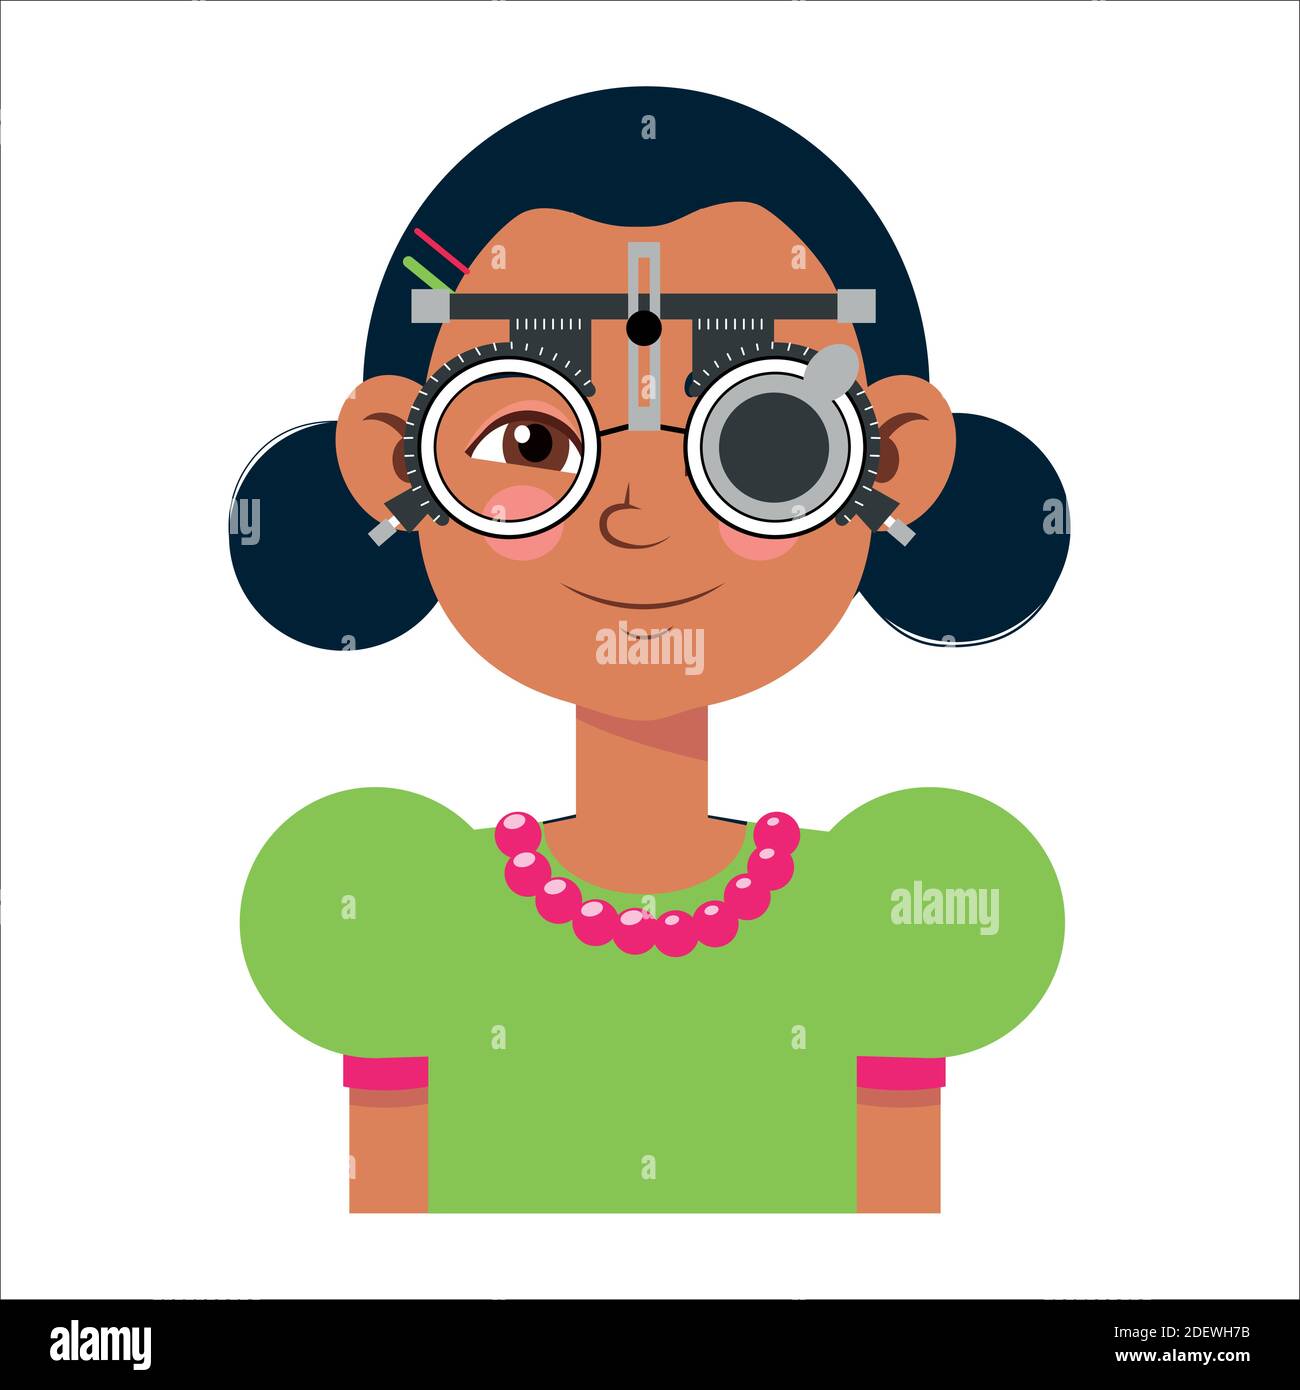 https://c8.alamy.com/comp/2DEWH7B/children-vision-checkup-in-the-ophthalmological-clinic-optometrist-checking-kid-eyesight-with-spectacles-medical-equipment-glasses-lens-selection-girl-2DEWH7B.jpg